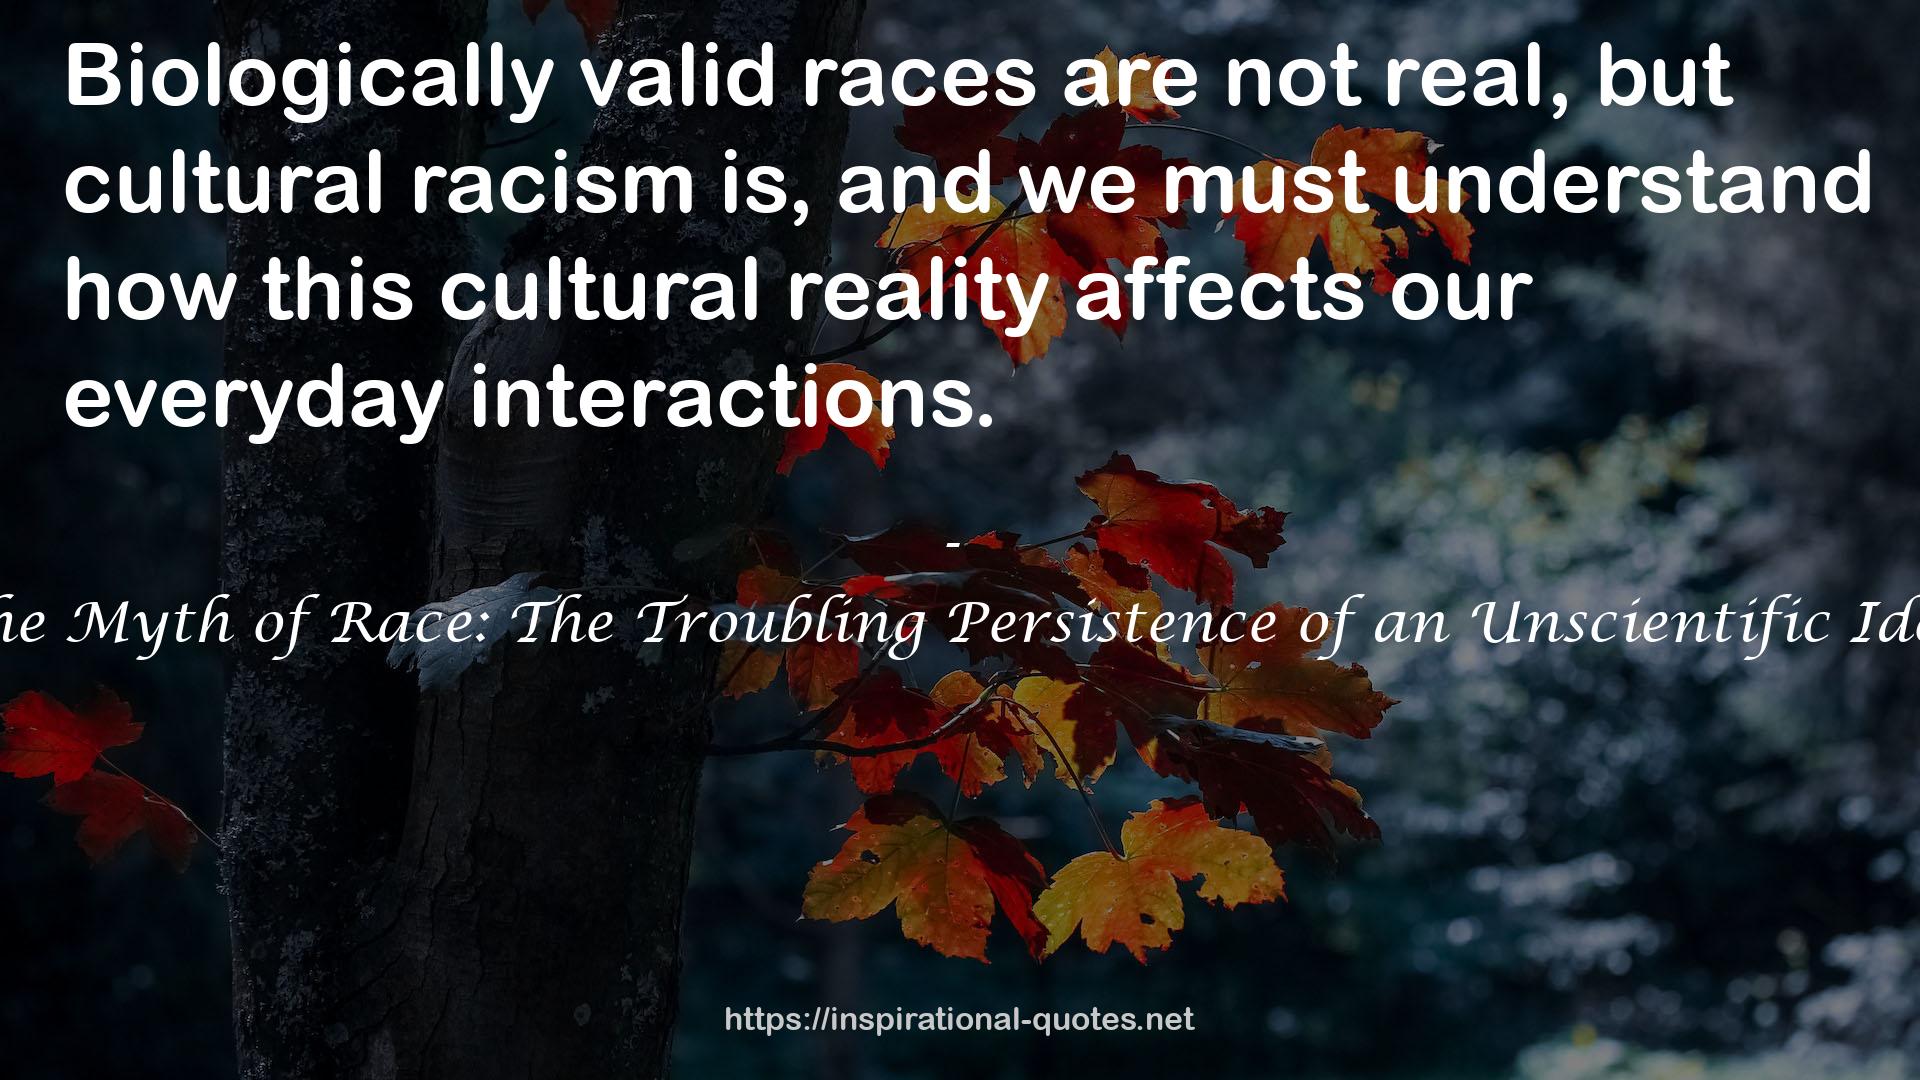 The Myth of Race: The Troubling Persistence of an Unscientific Idea QUOTES